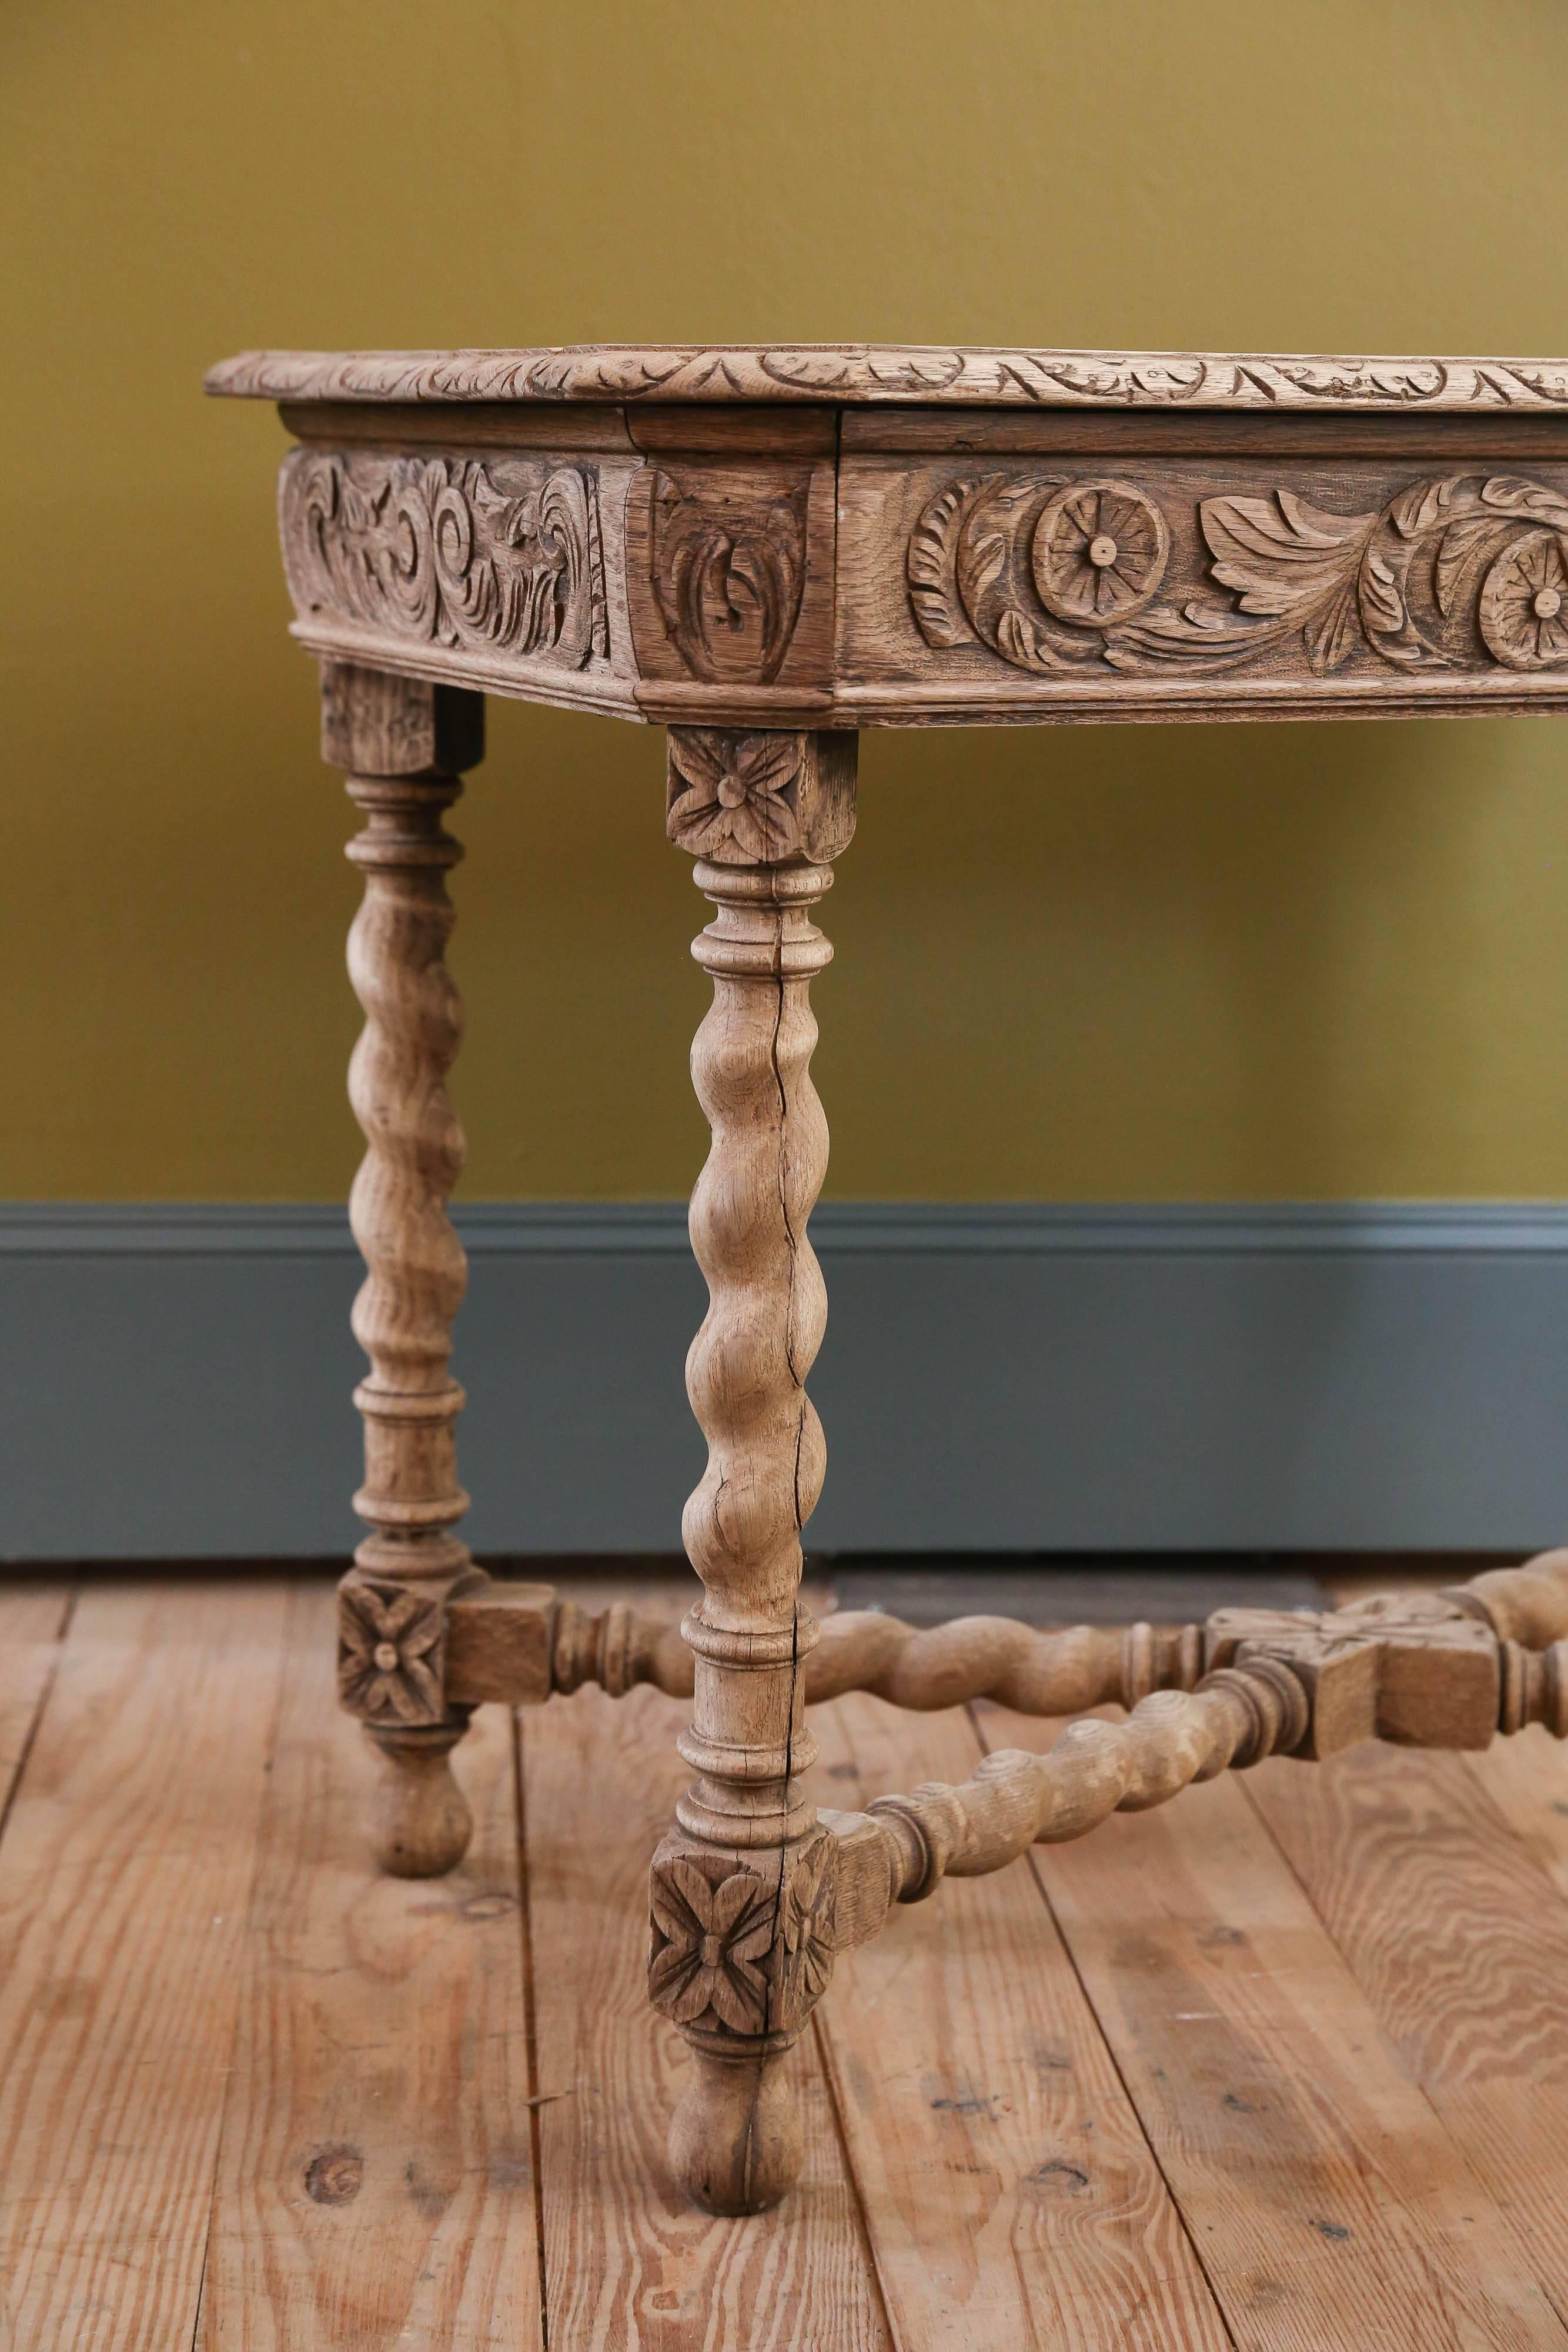 Early 20th Century Renaissance Revival-Style Bleached Oak Barley Twist Table from Spain, circa 1900